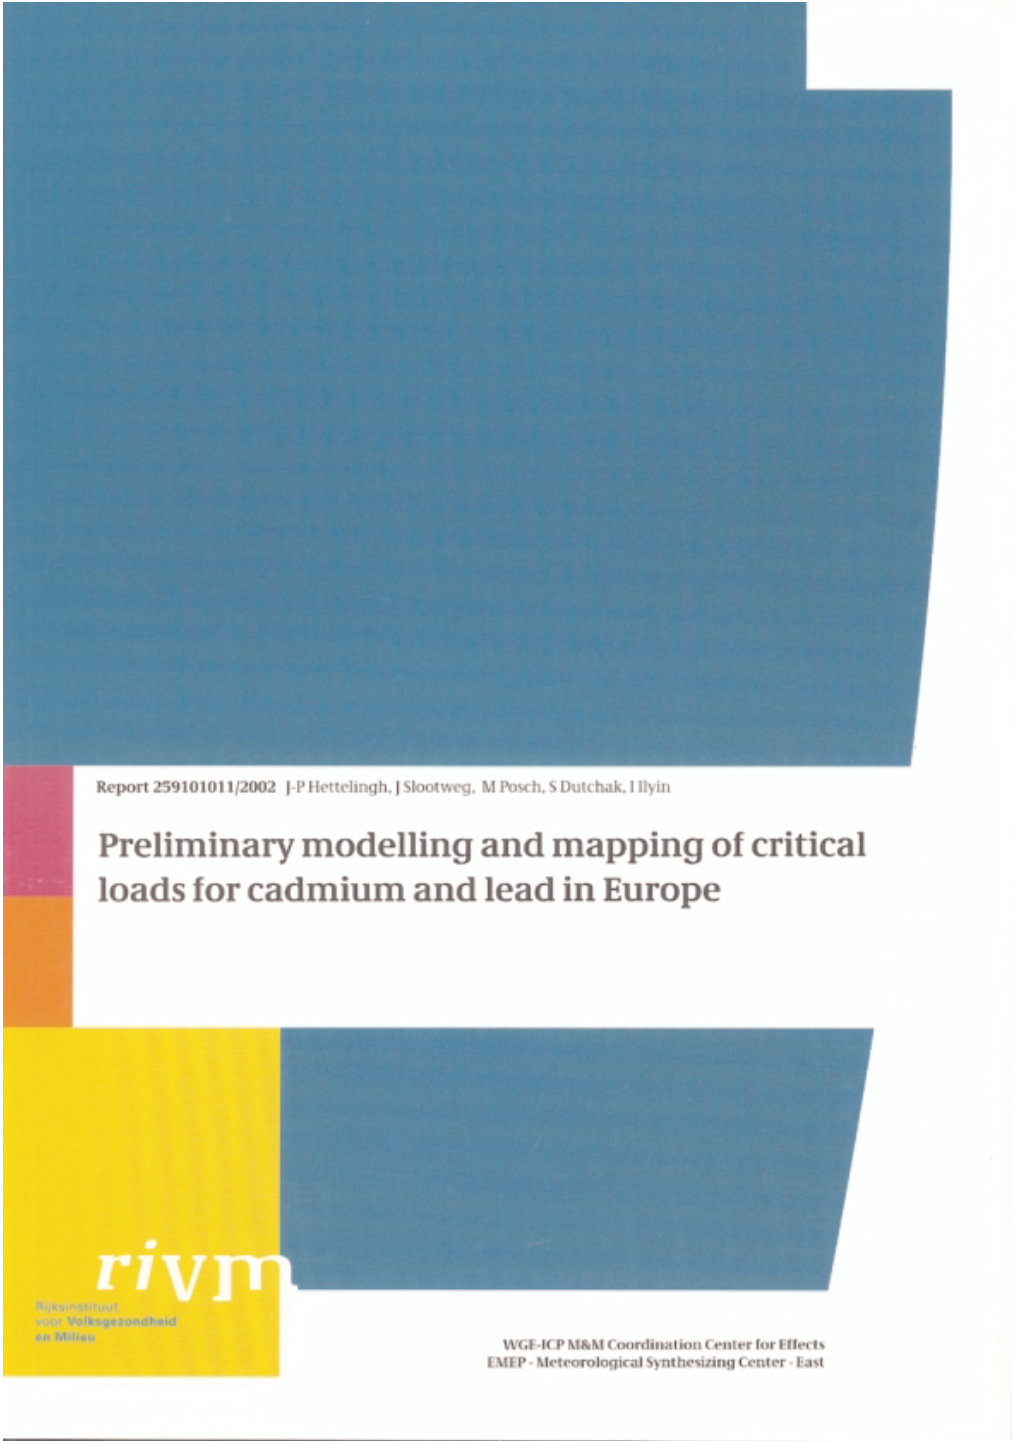 Preliminary Modelling and Mapping of Critical Loads for Cadmium and Lead in Europe